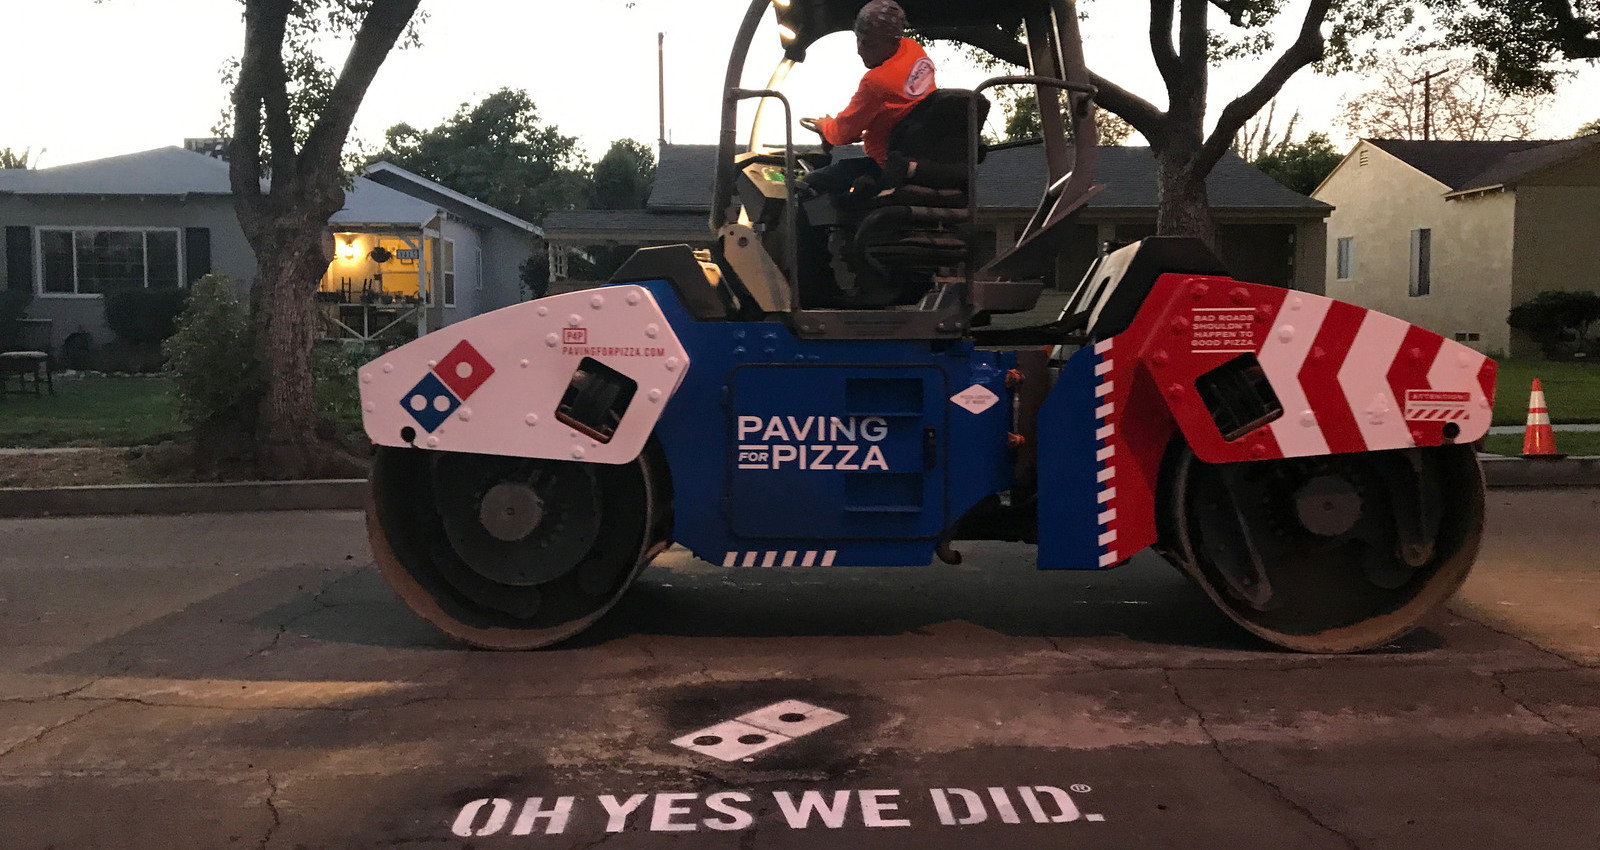 Paving for Pizza